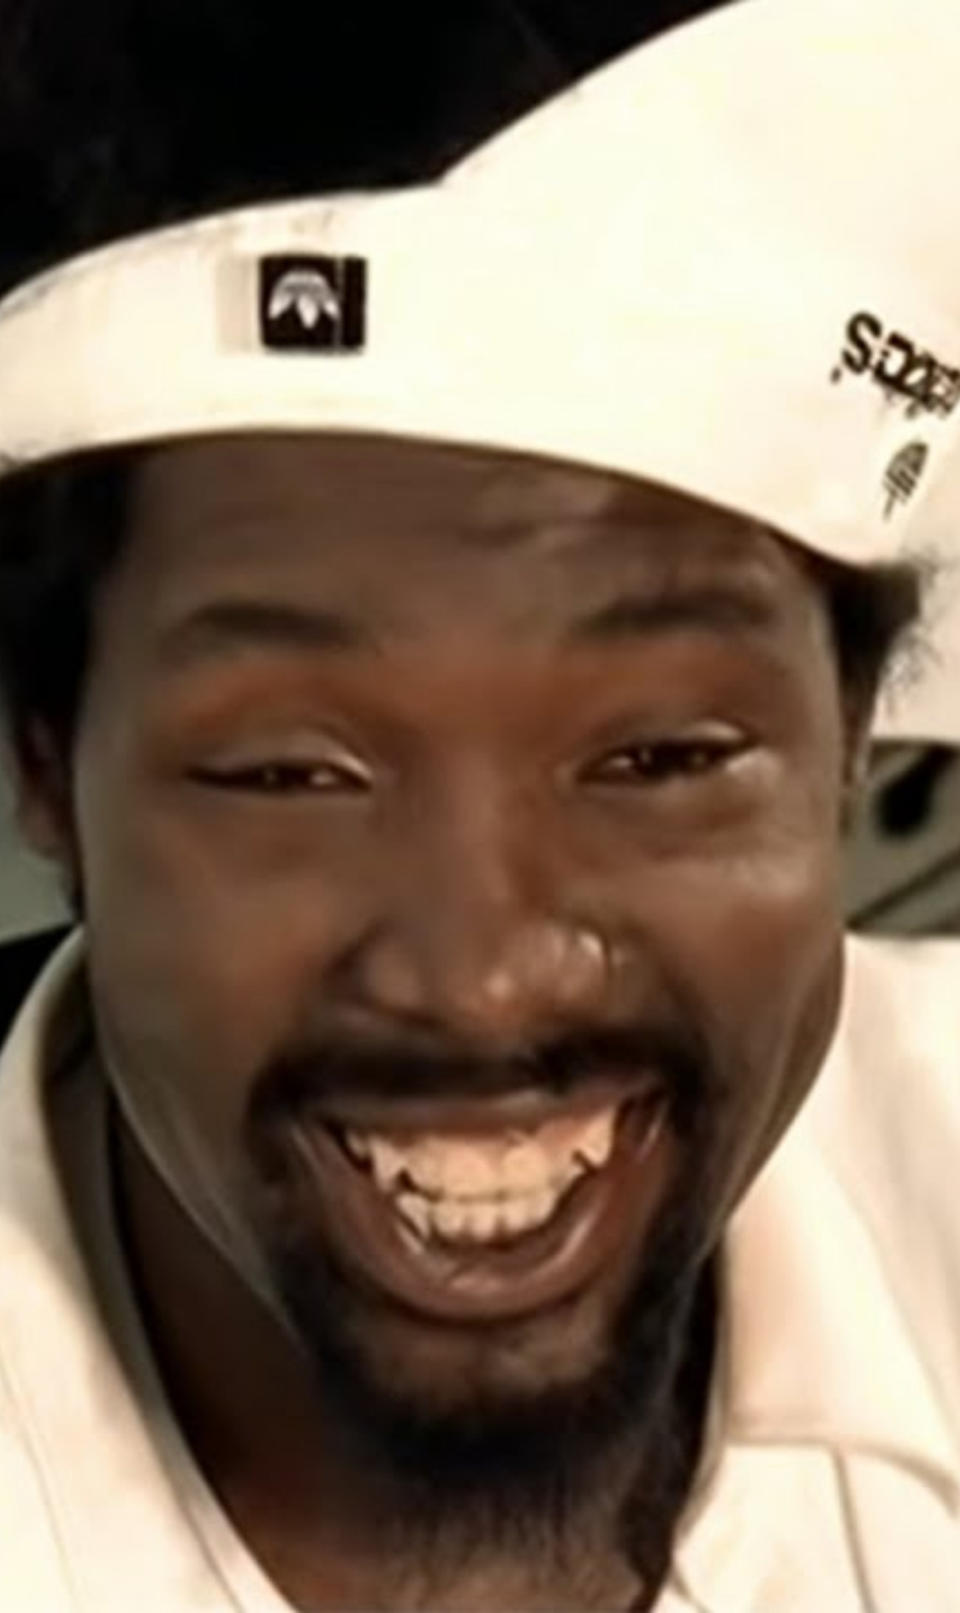 Afroman in his "Because I Got High" music video